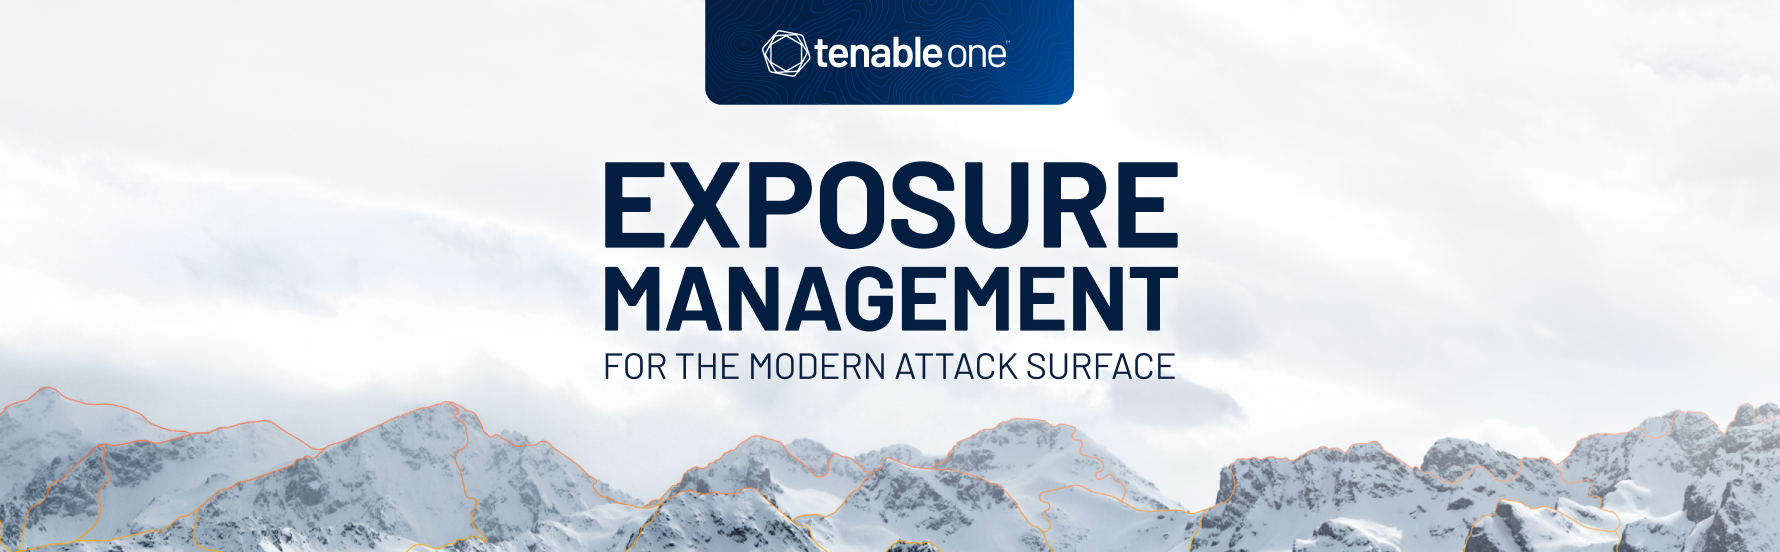 how to use exposure management to secure the modern attack surface